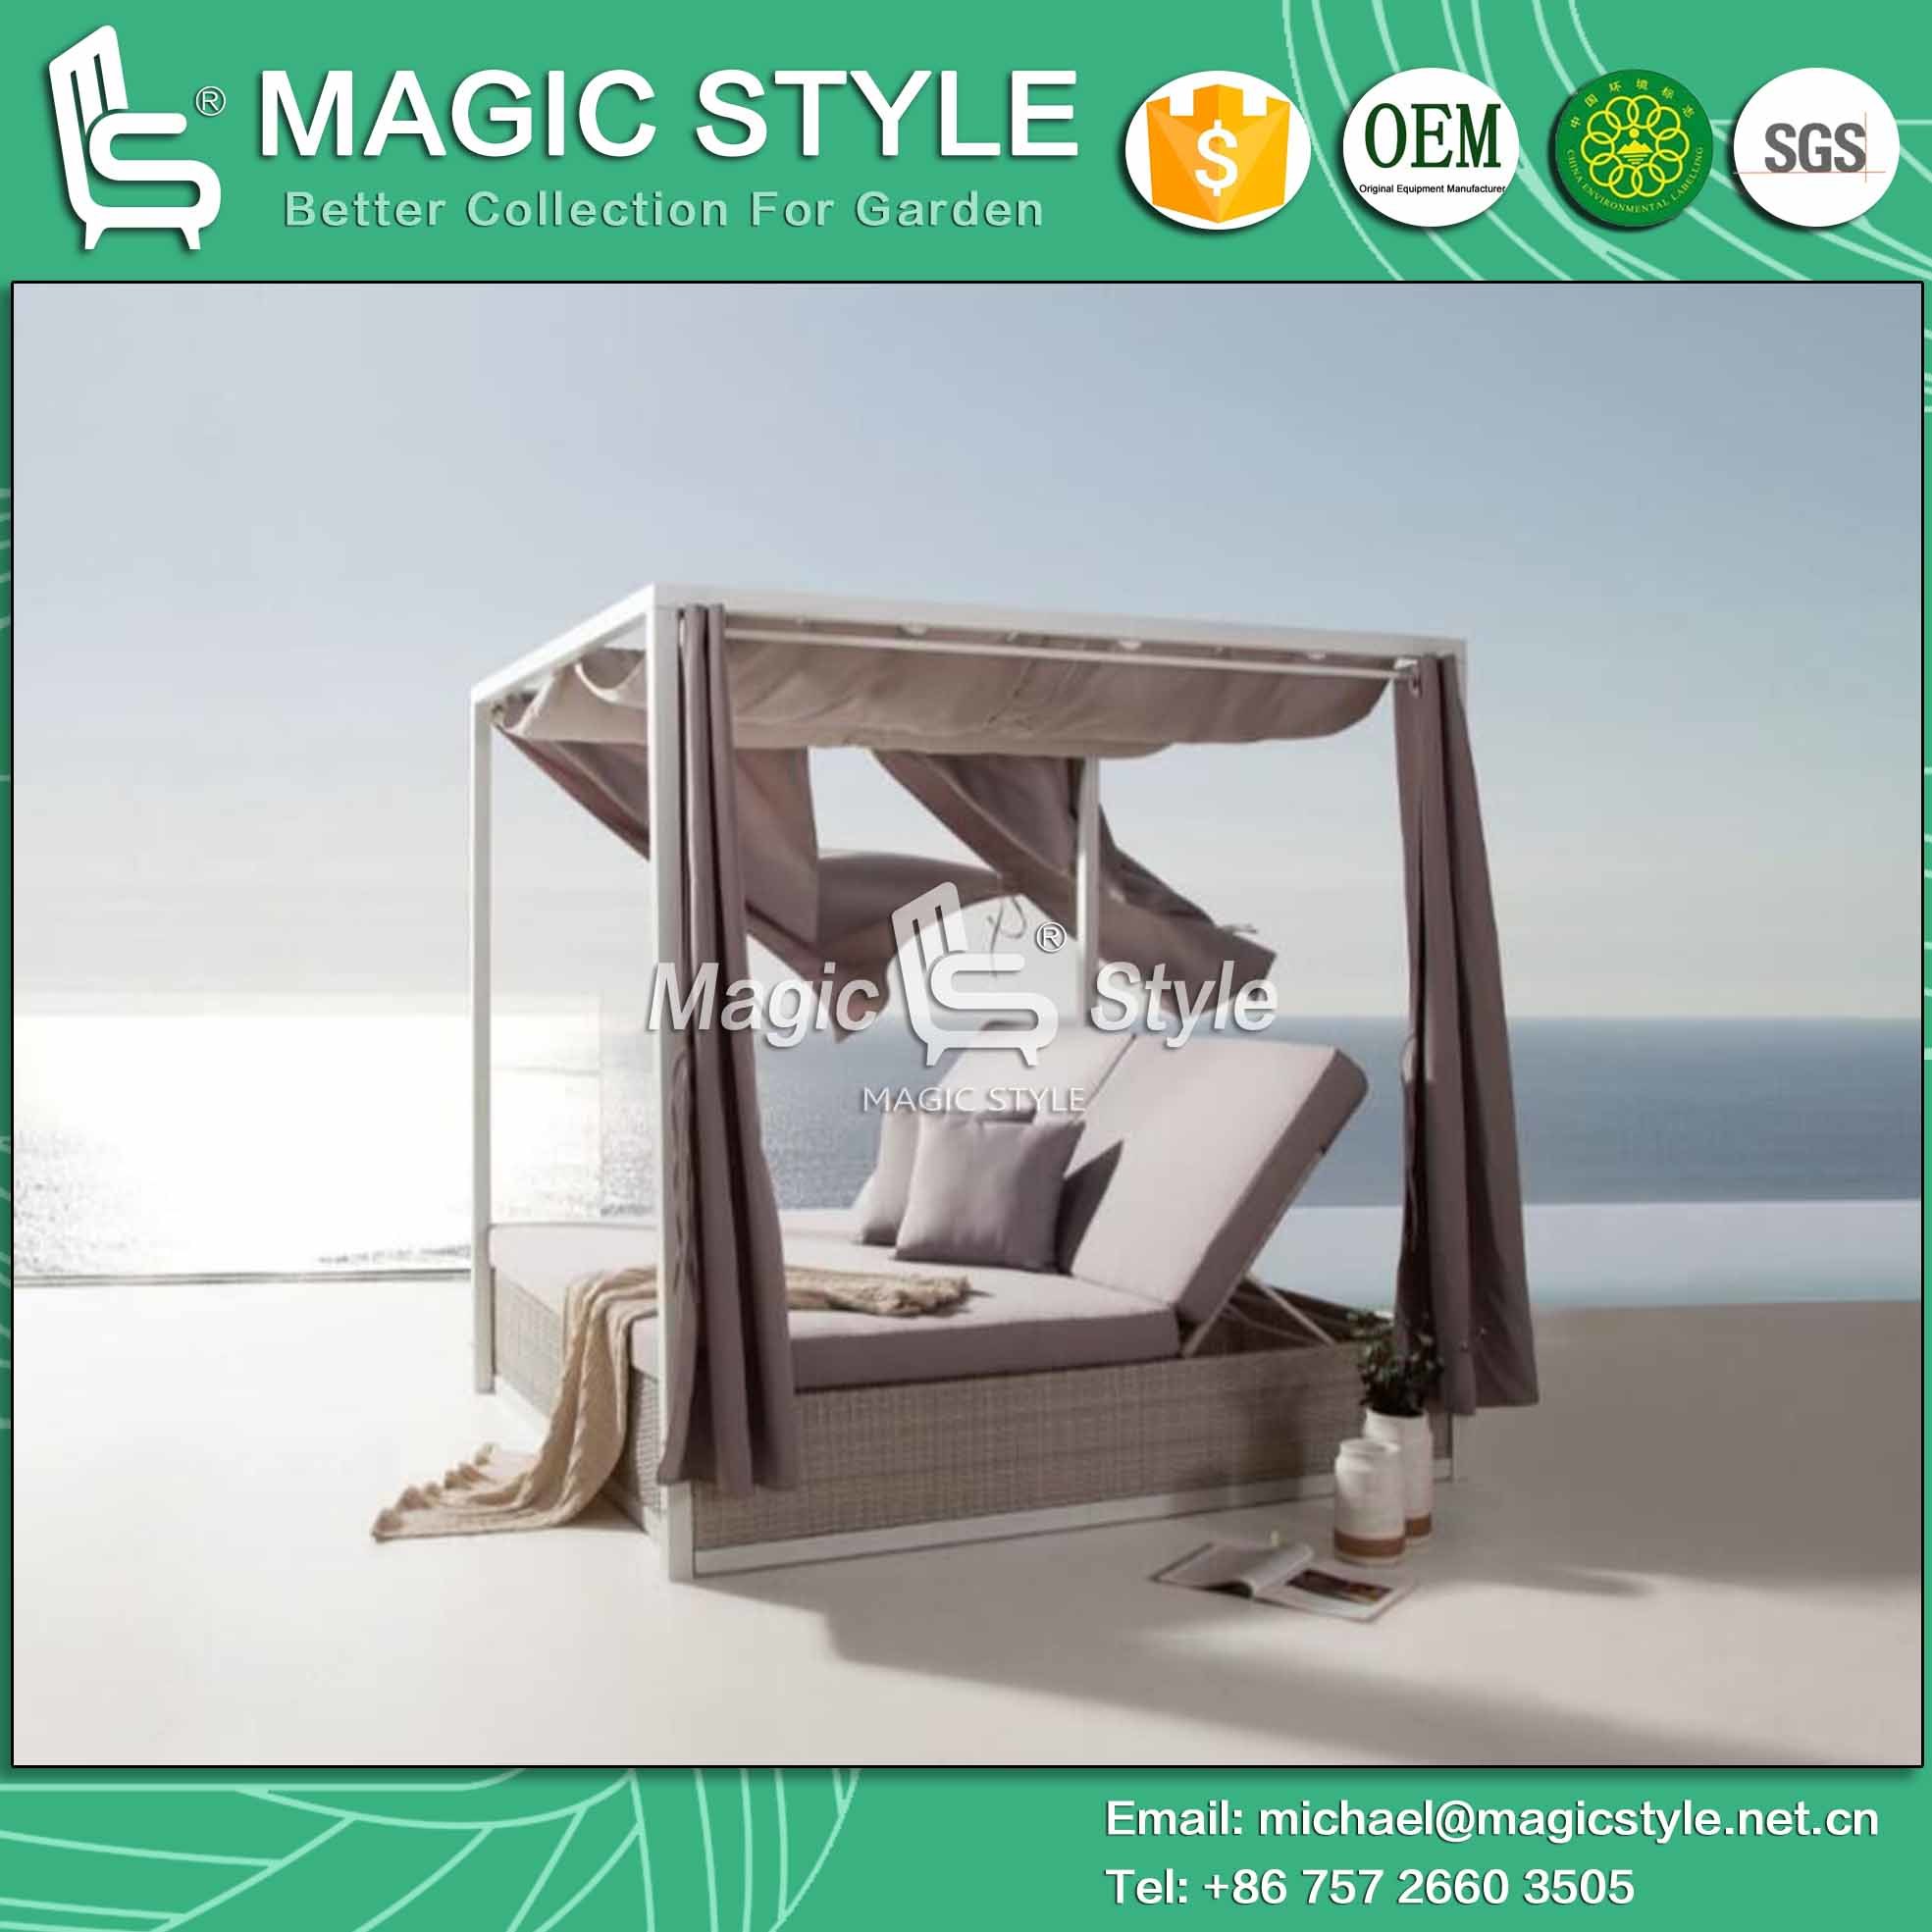 Outdoor Wicker Daybed with Cushion Patio Weaving Sunbed with Curtains Garden Rattan Sunbed Modern Wicker Daybed Pool Sunbed